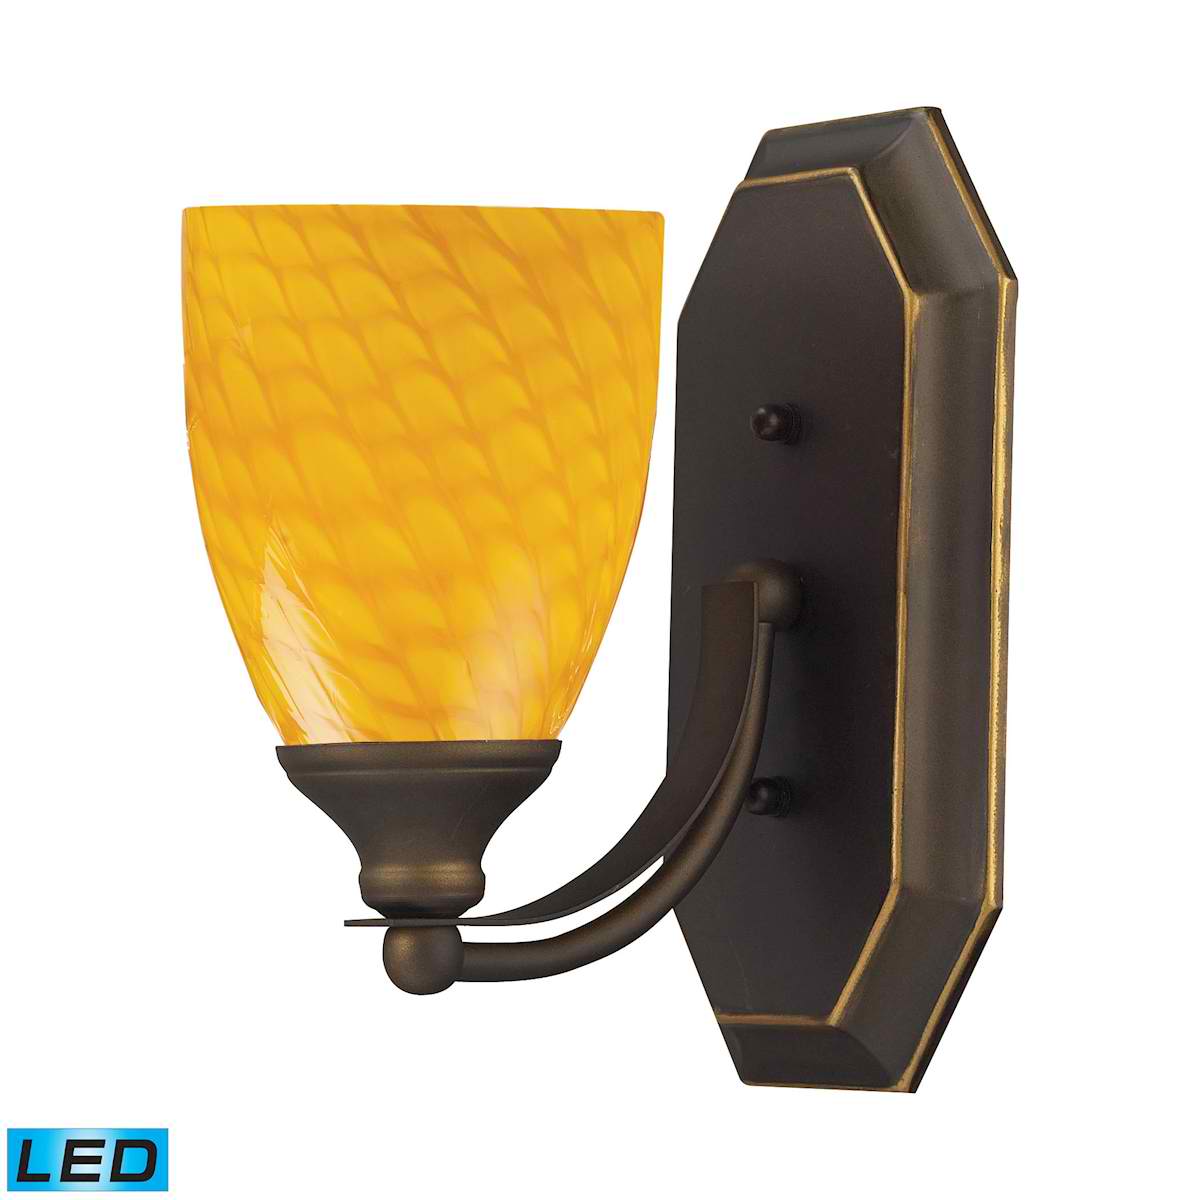 1 Light Vanity in Aged Bronze and Canary Glass - LED Offering Up To 800 Lumens (60 Watt Equivalent)